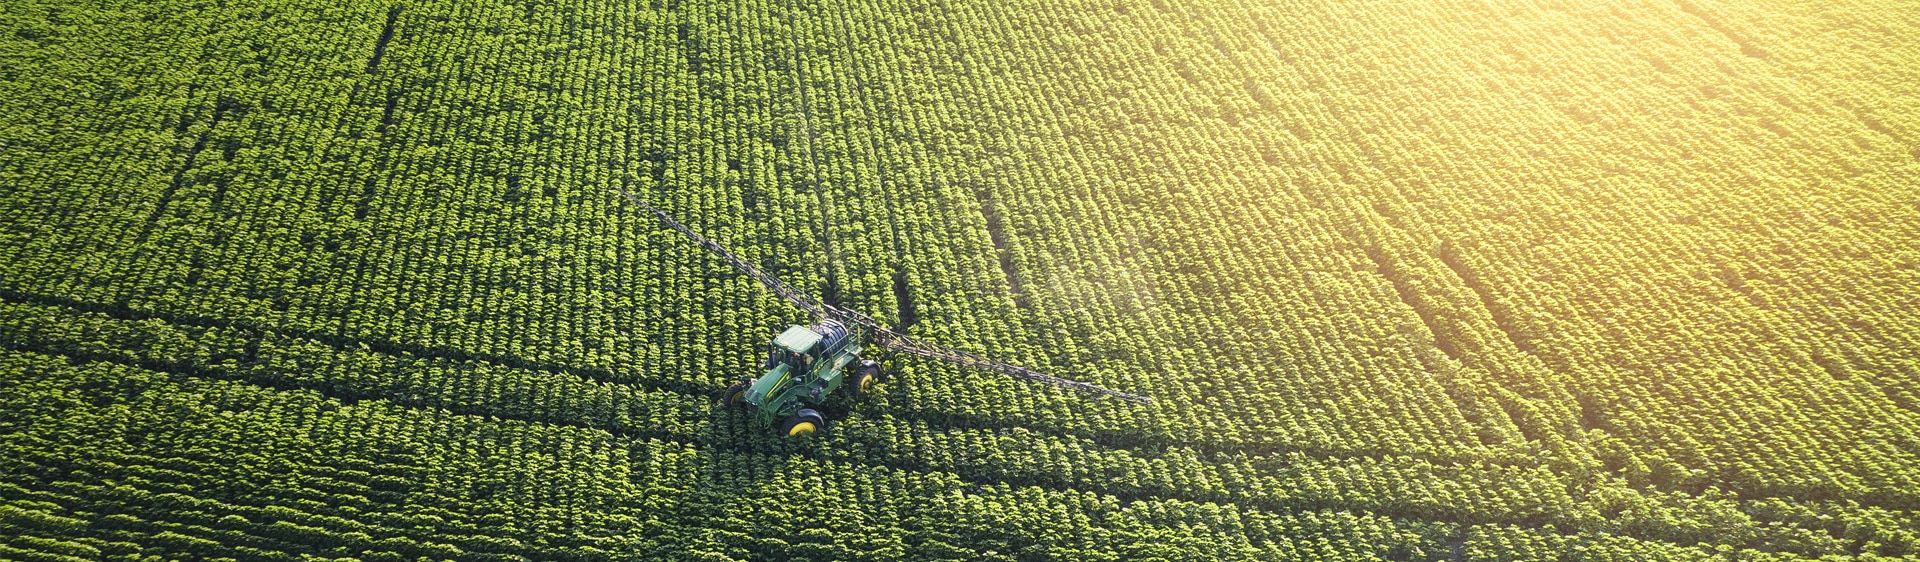 Tractor in a green field